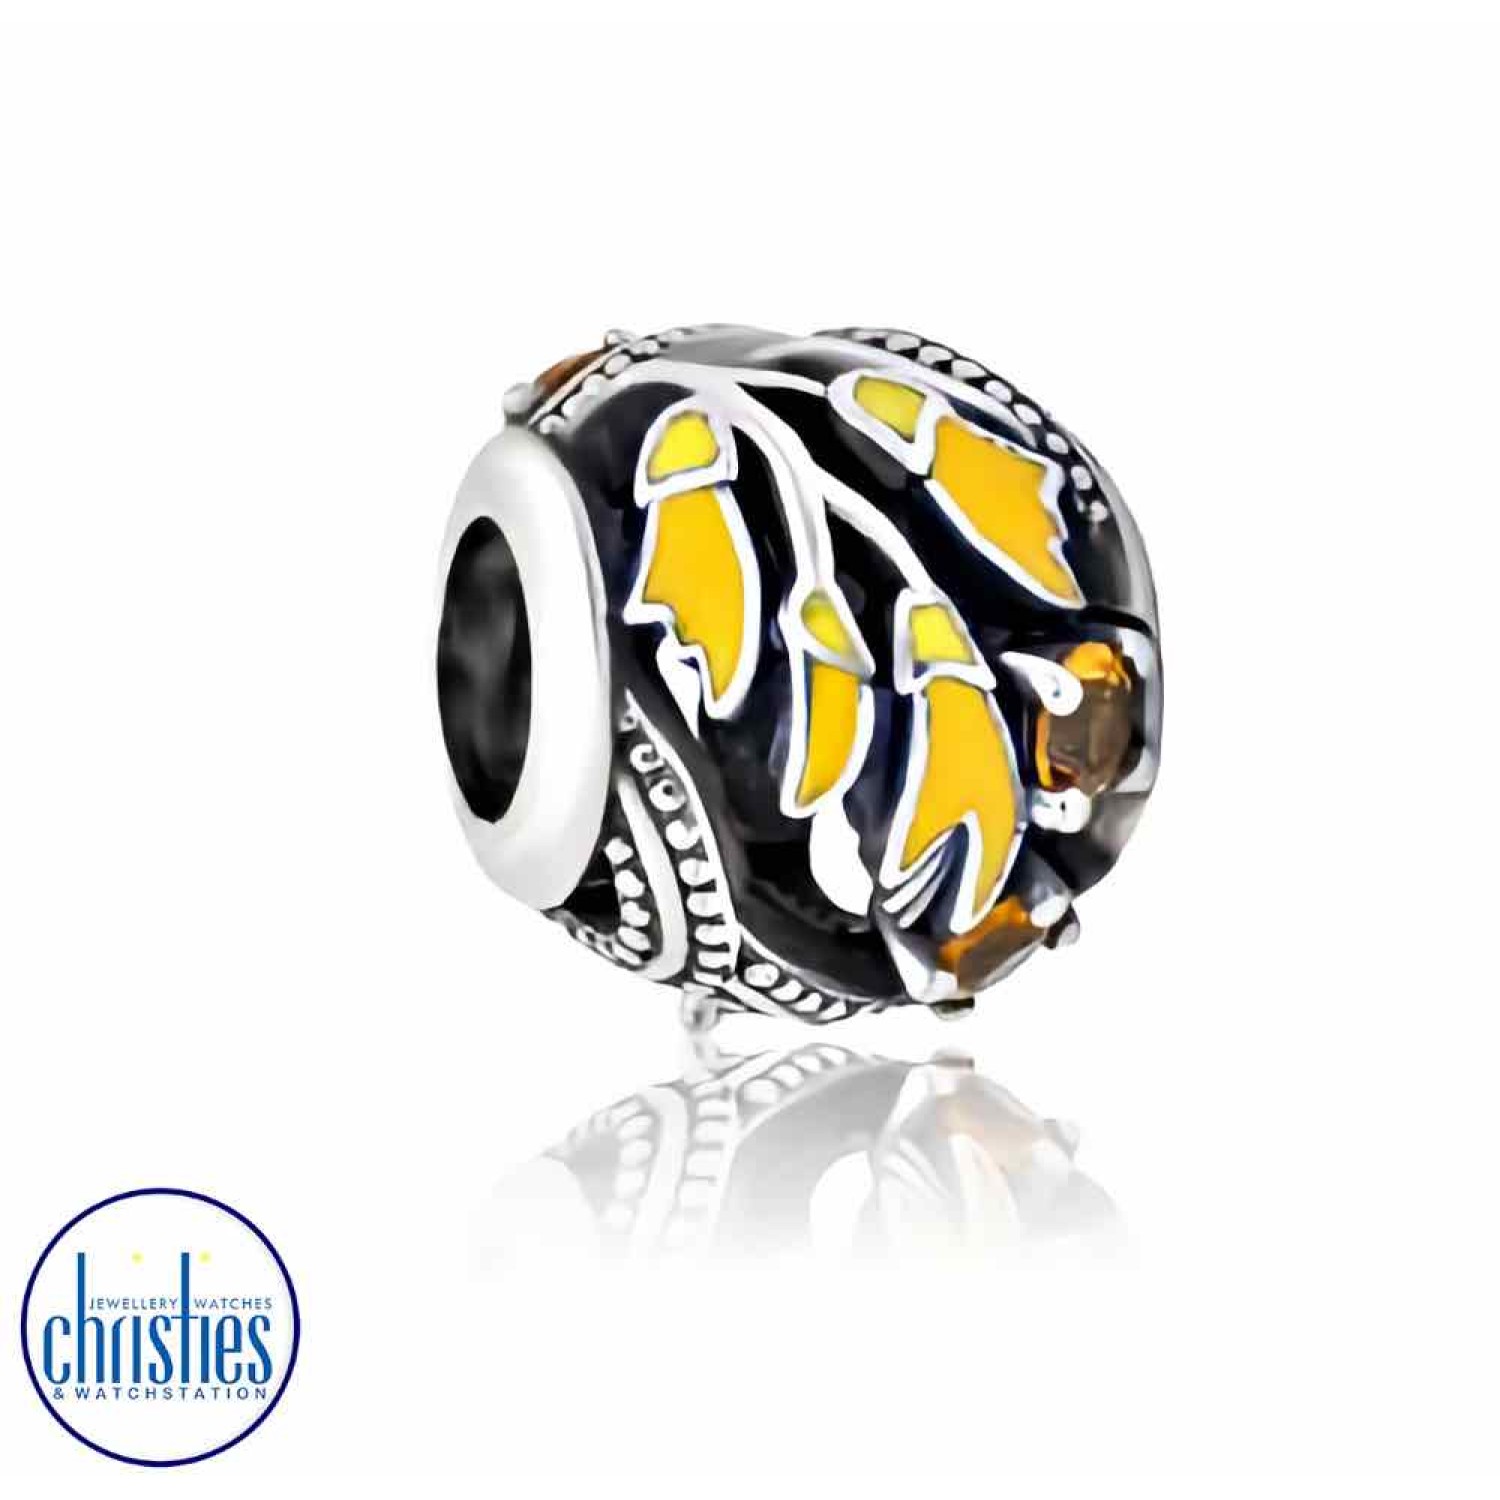 LKE071 Evolve Jewellery Kowhai Charm. The stunning yellow enamel and cubic zirconia stones featured on our Kōwhai charm are representative of New Zealand’s unofficial flower.Attracting enchanting native birds and insects, this beautiful native tree with 